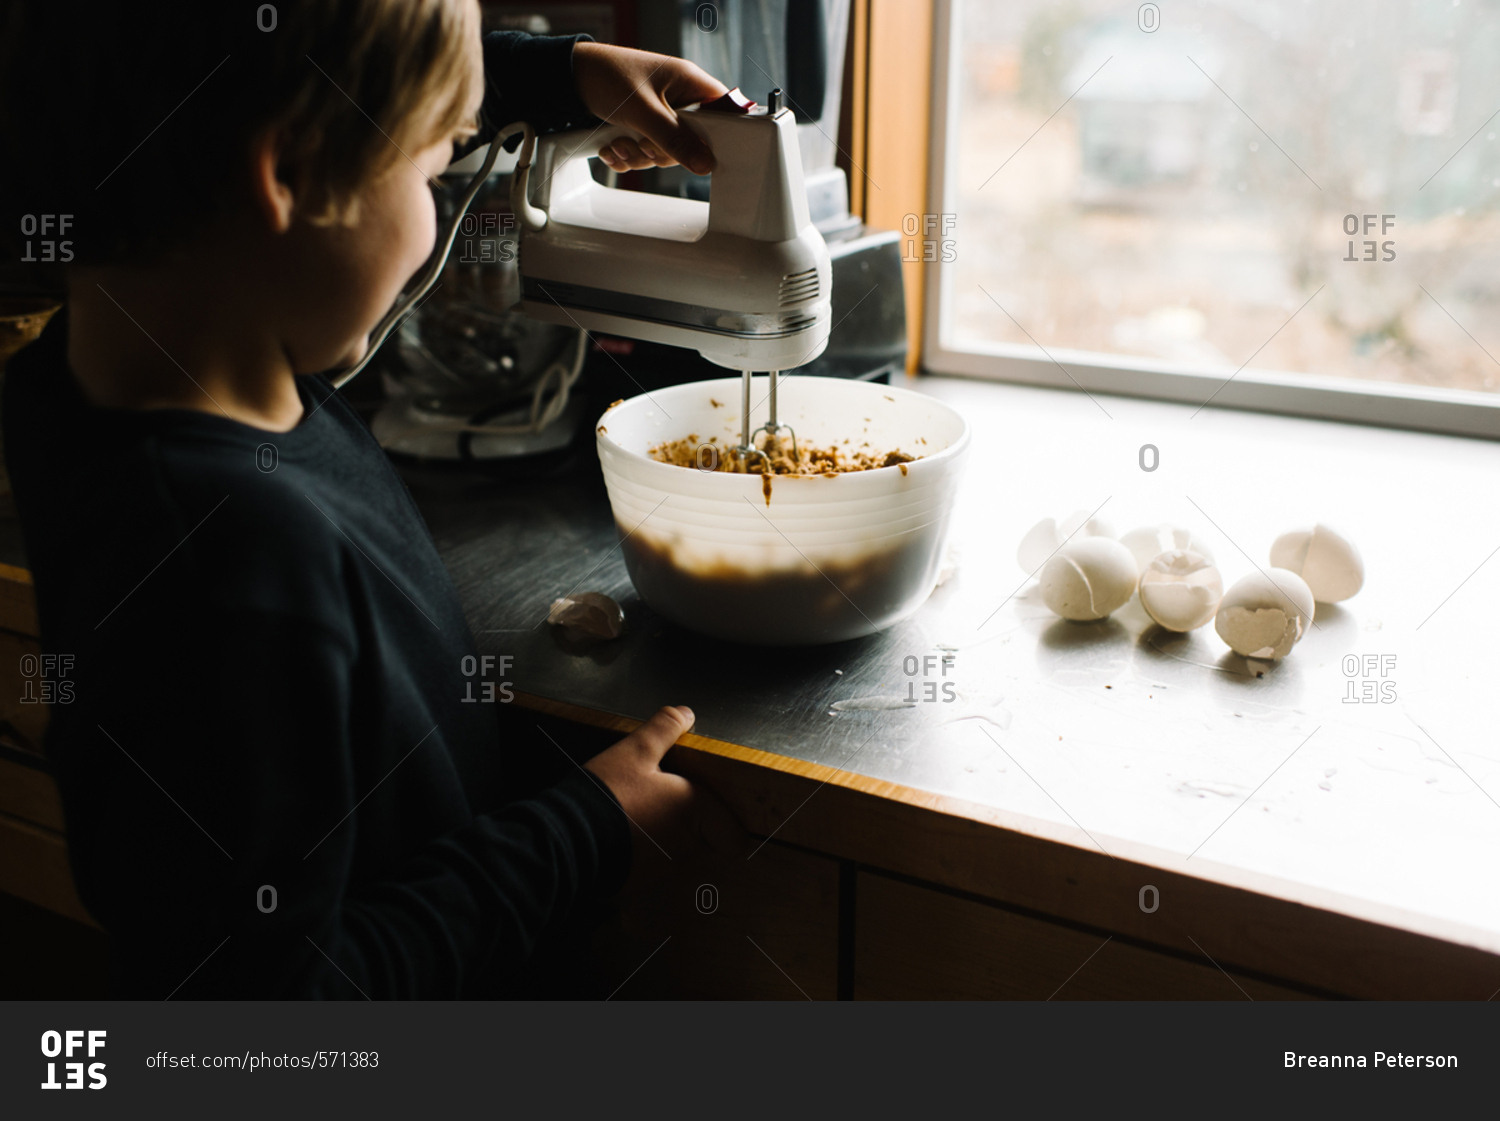 Child using a hand mixer to blend batter in bowl